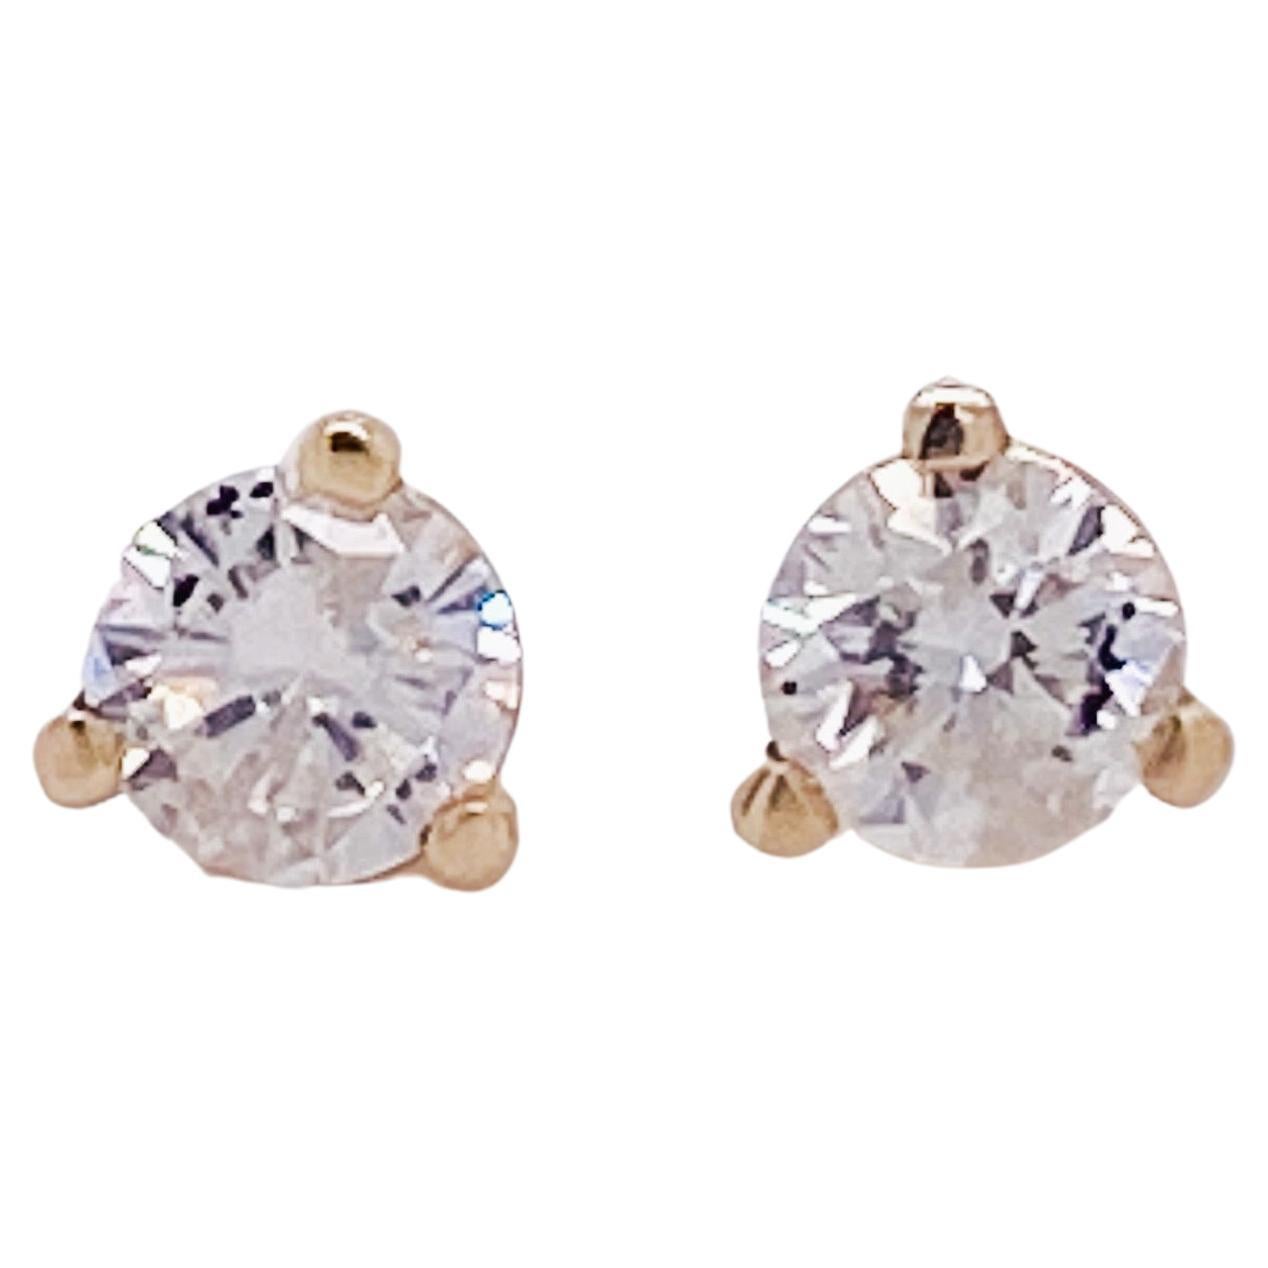 Diamond Martini Stud Earrings 1/4 CT TW in 14K Yellow Gold, .25 Accent Stack Lv For Sale